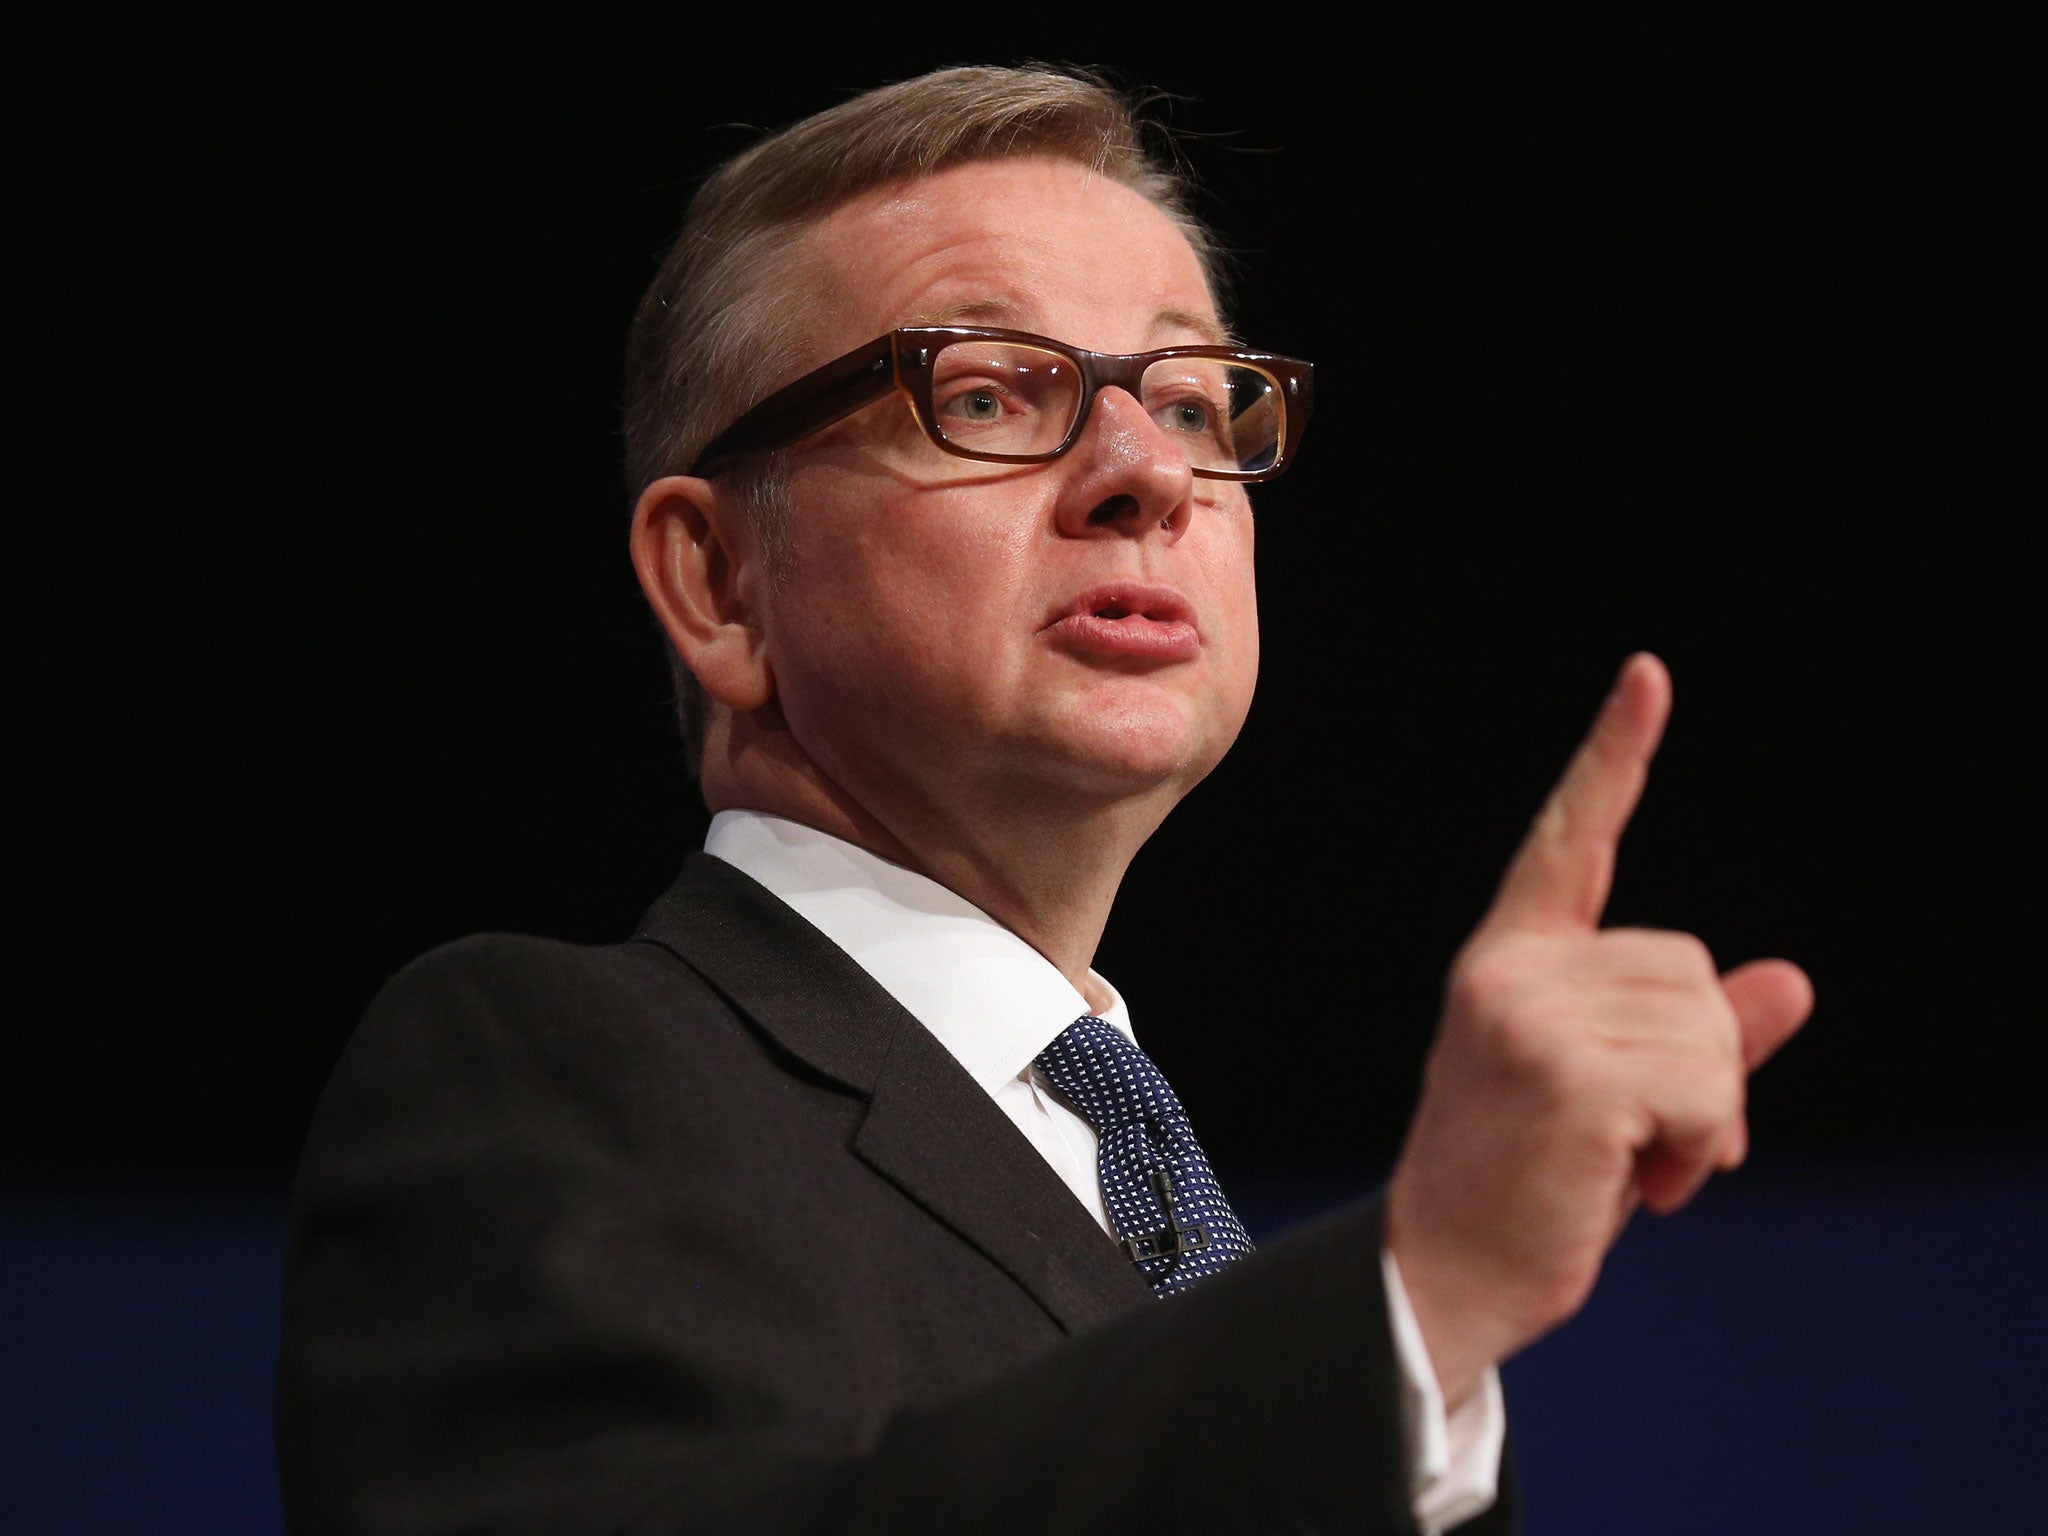 Michael Gove has said that he will appoint the next head of Ofsted based upon their suitability for the role